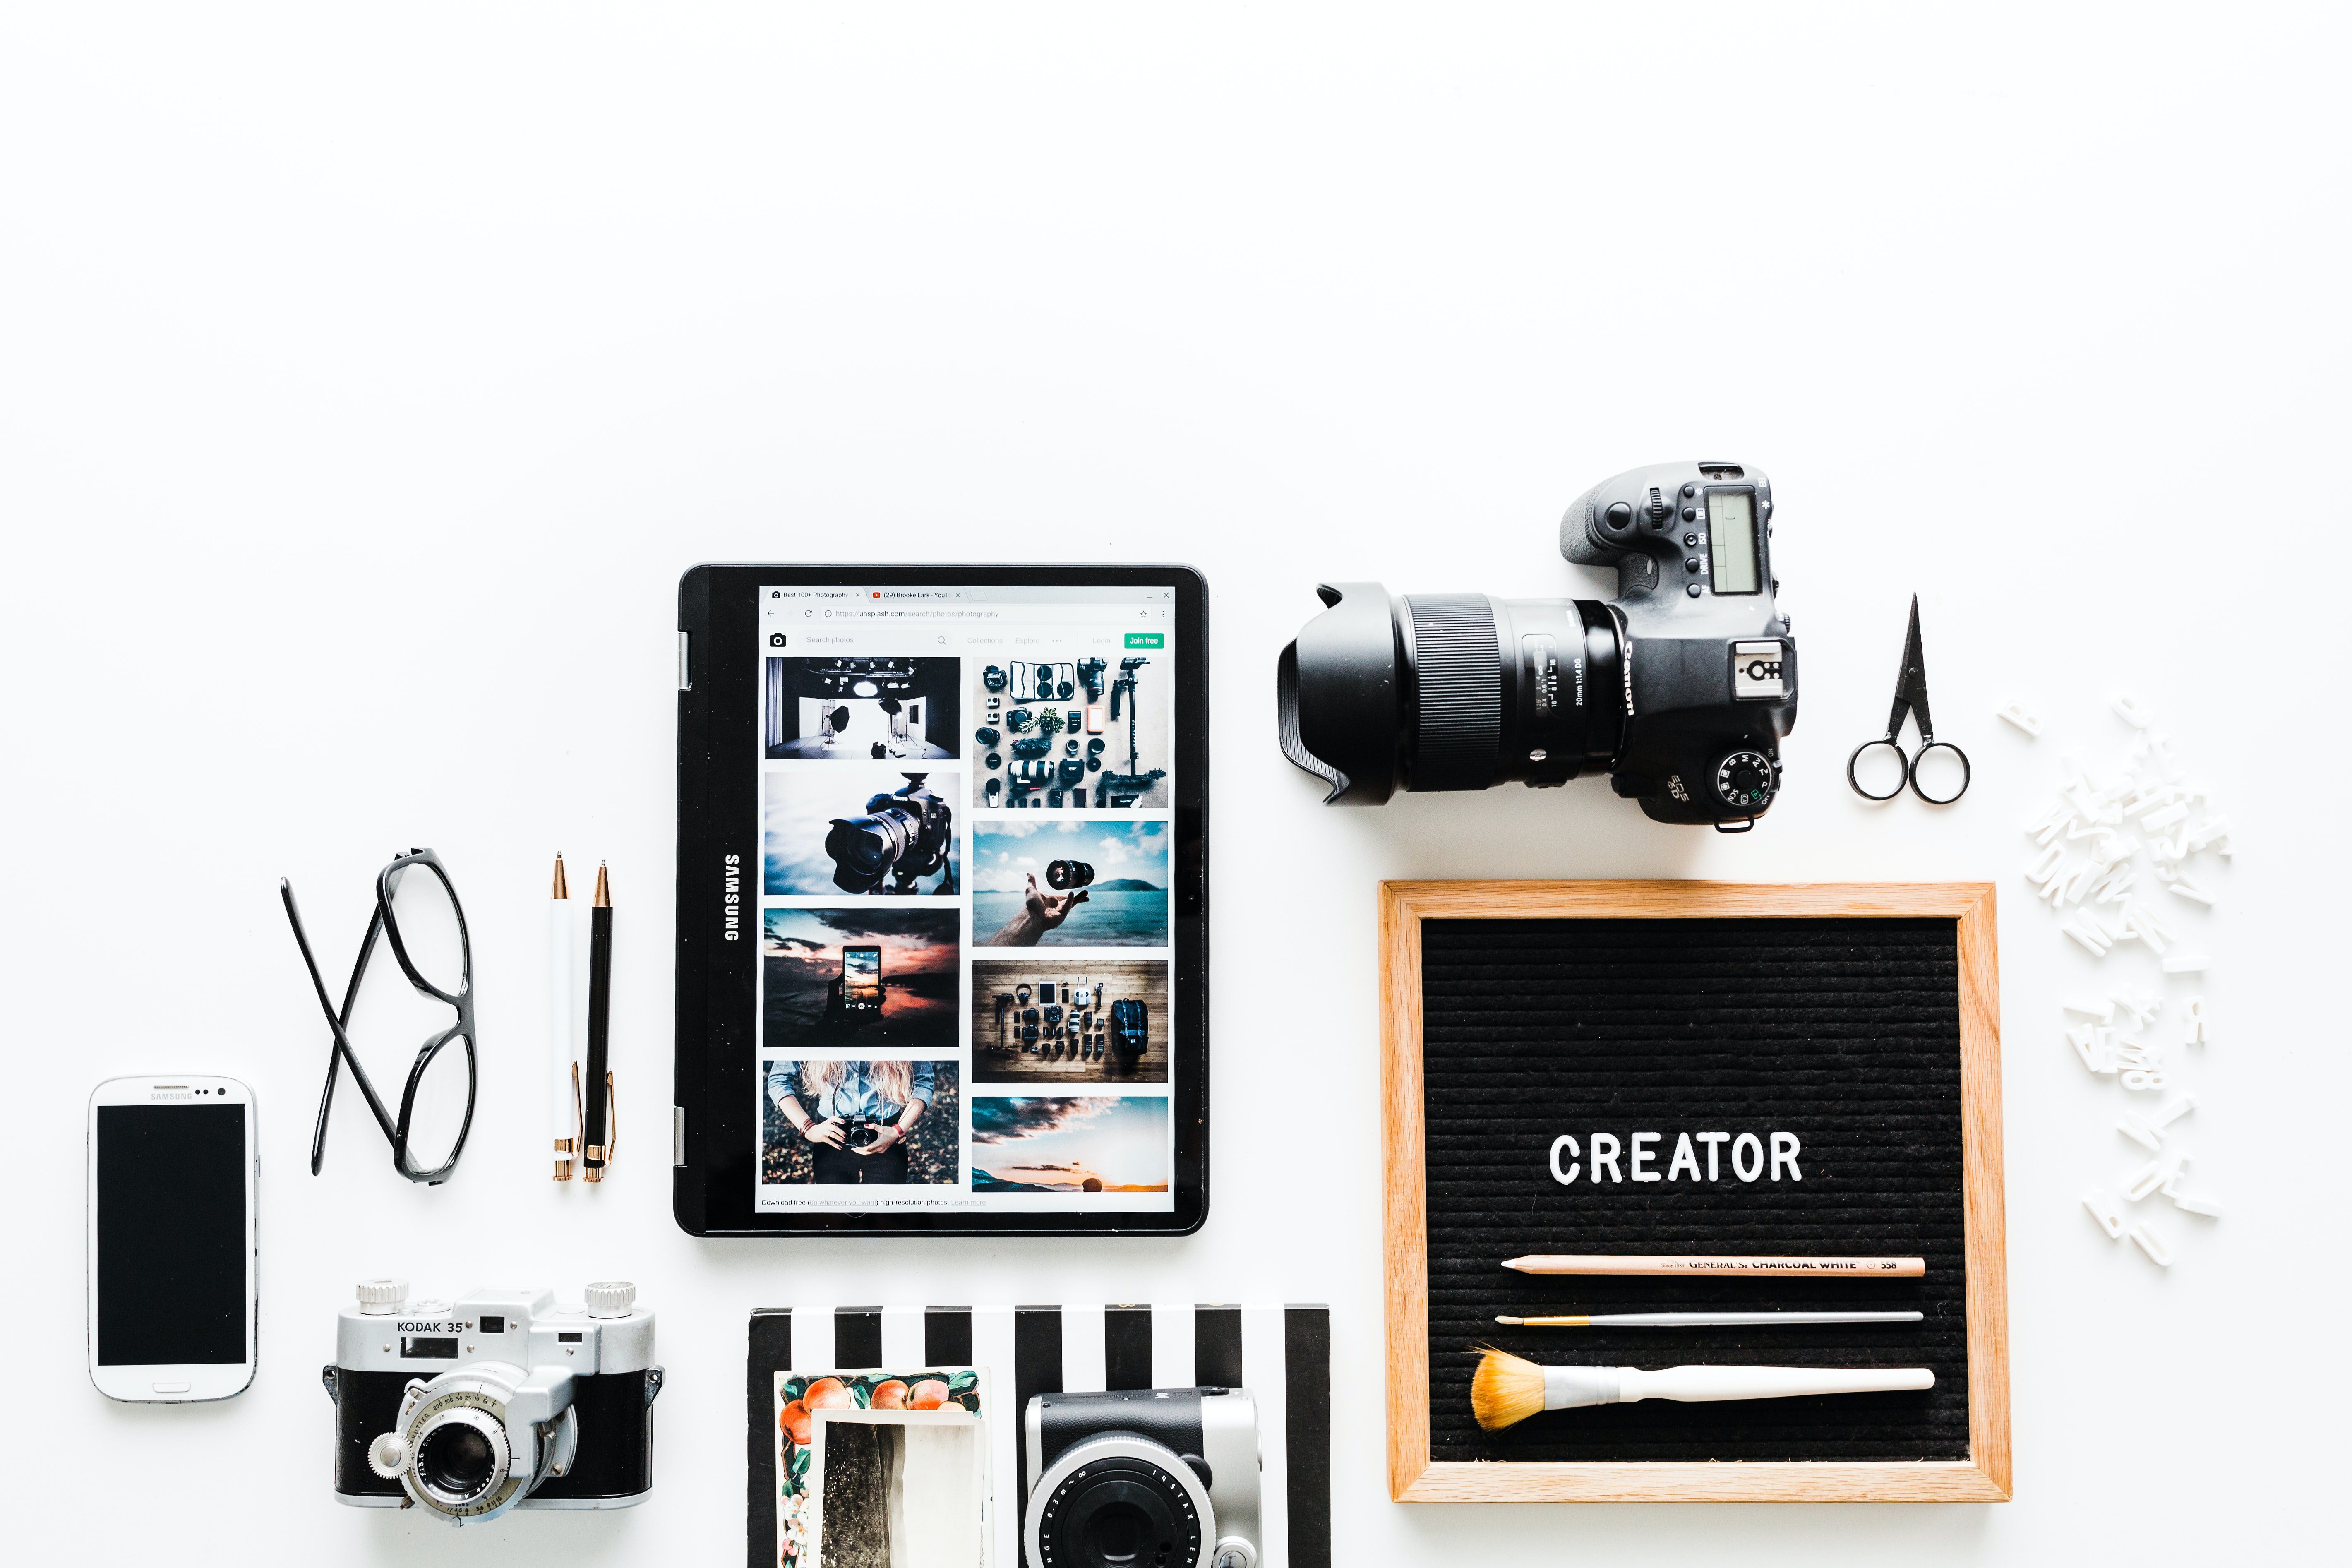 Tools for influencers to create content